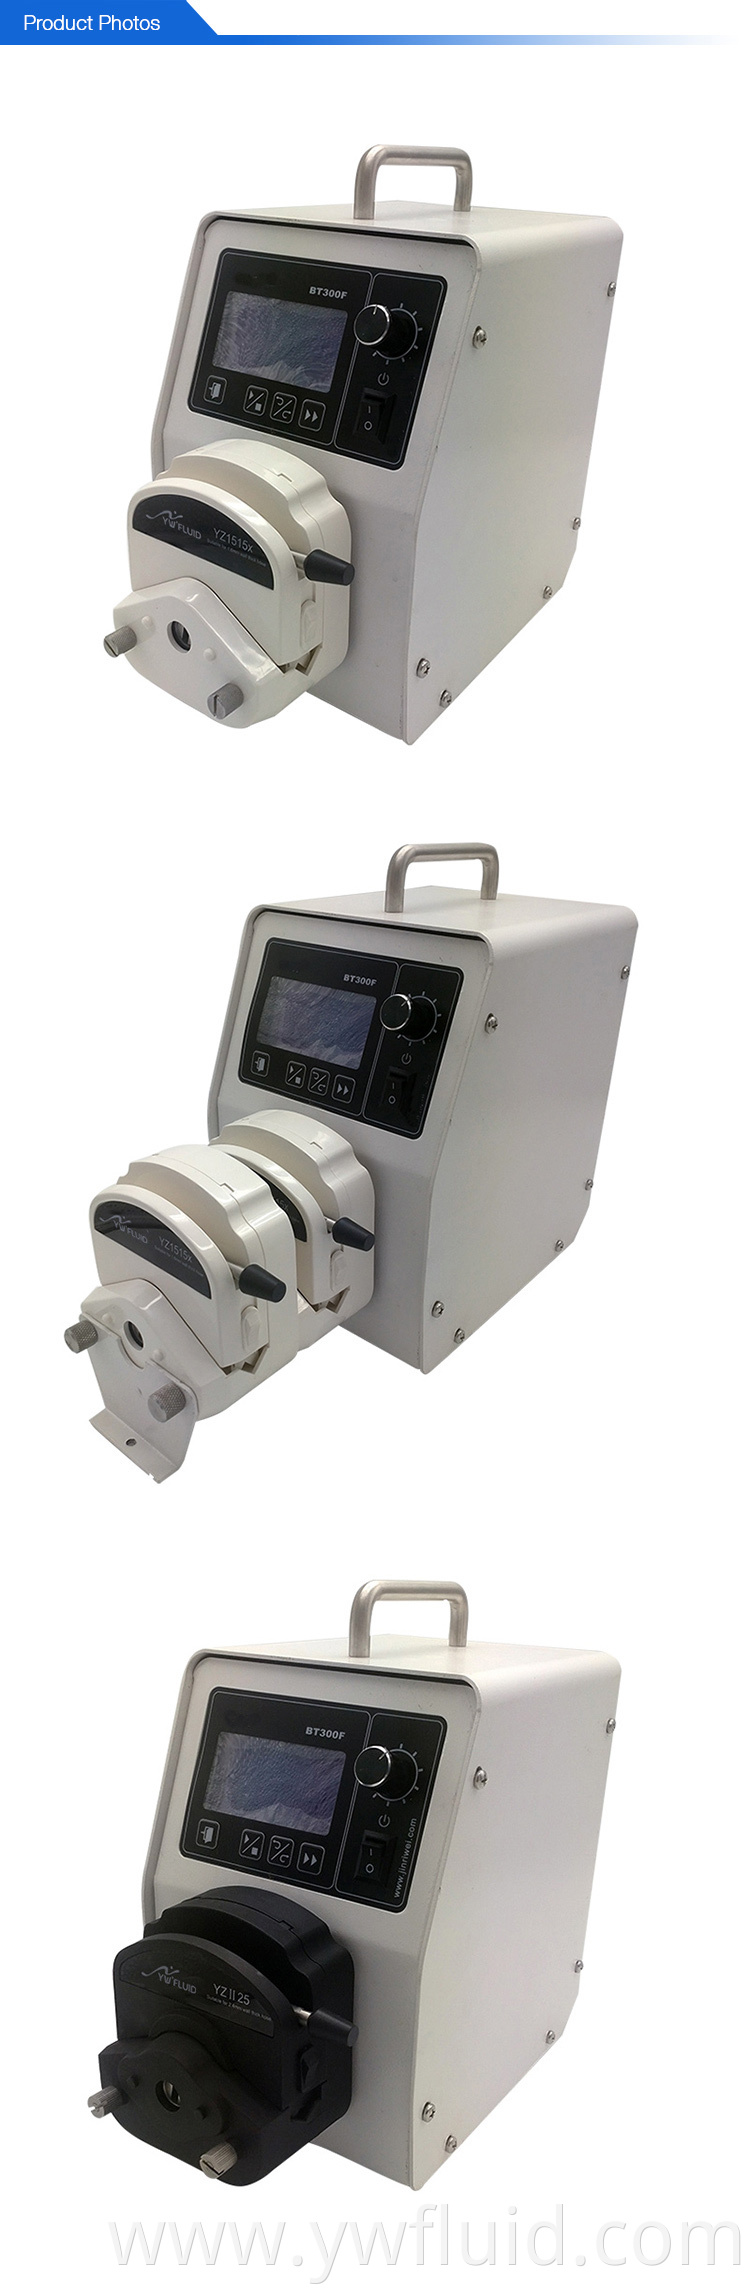 YWfluid Speed Control Digital Peristaltic Pumpic Pump with Multi Working Mode for Laboratory analytical